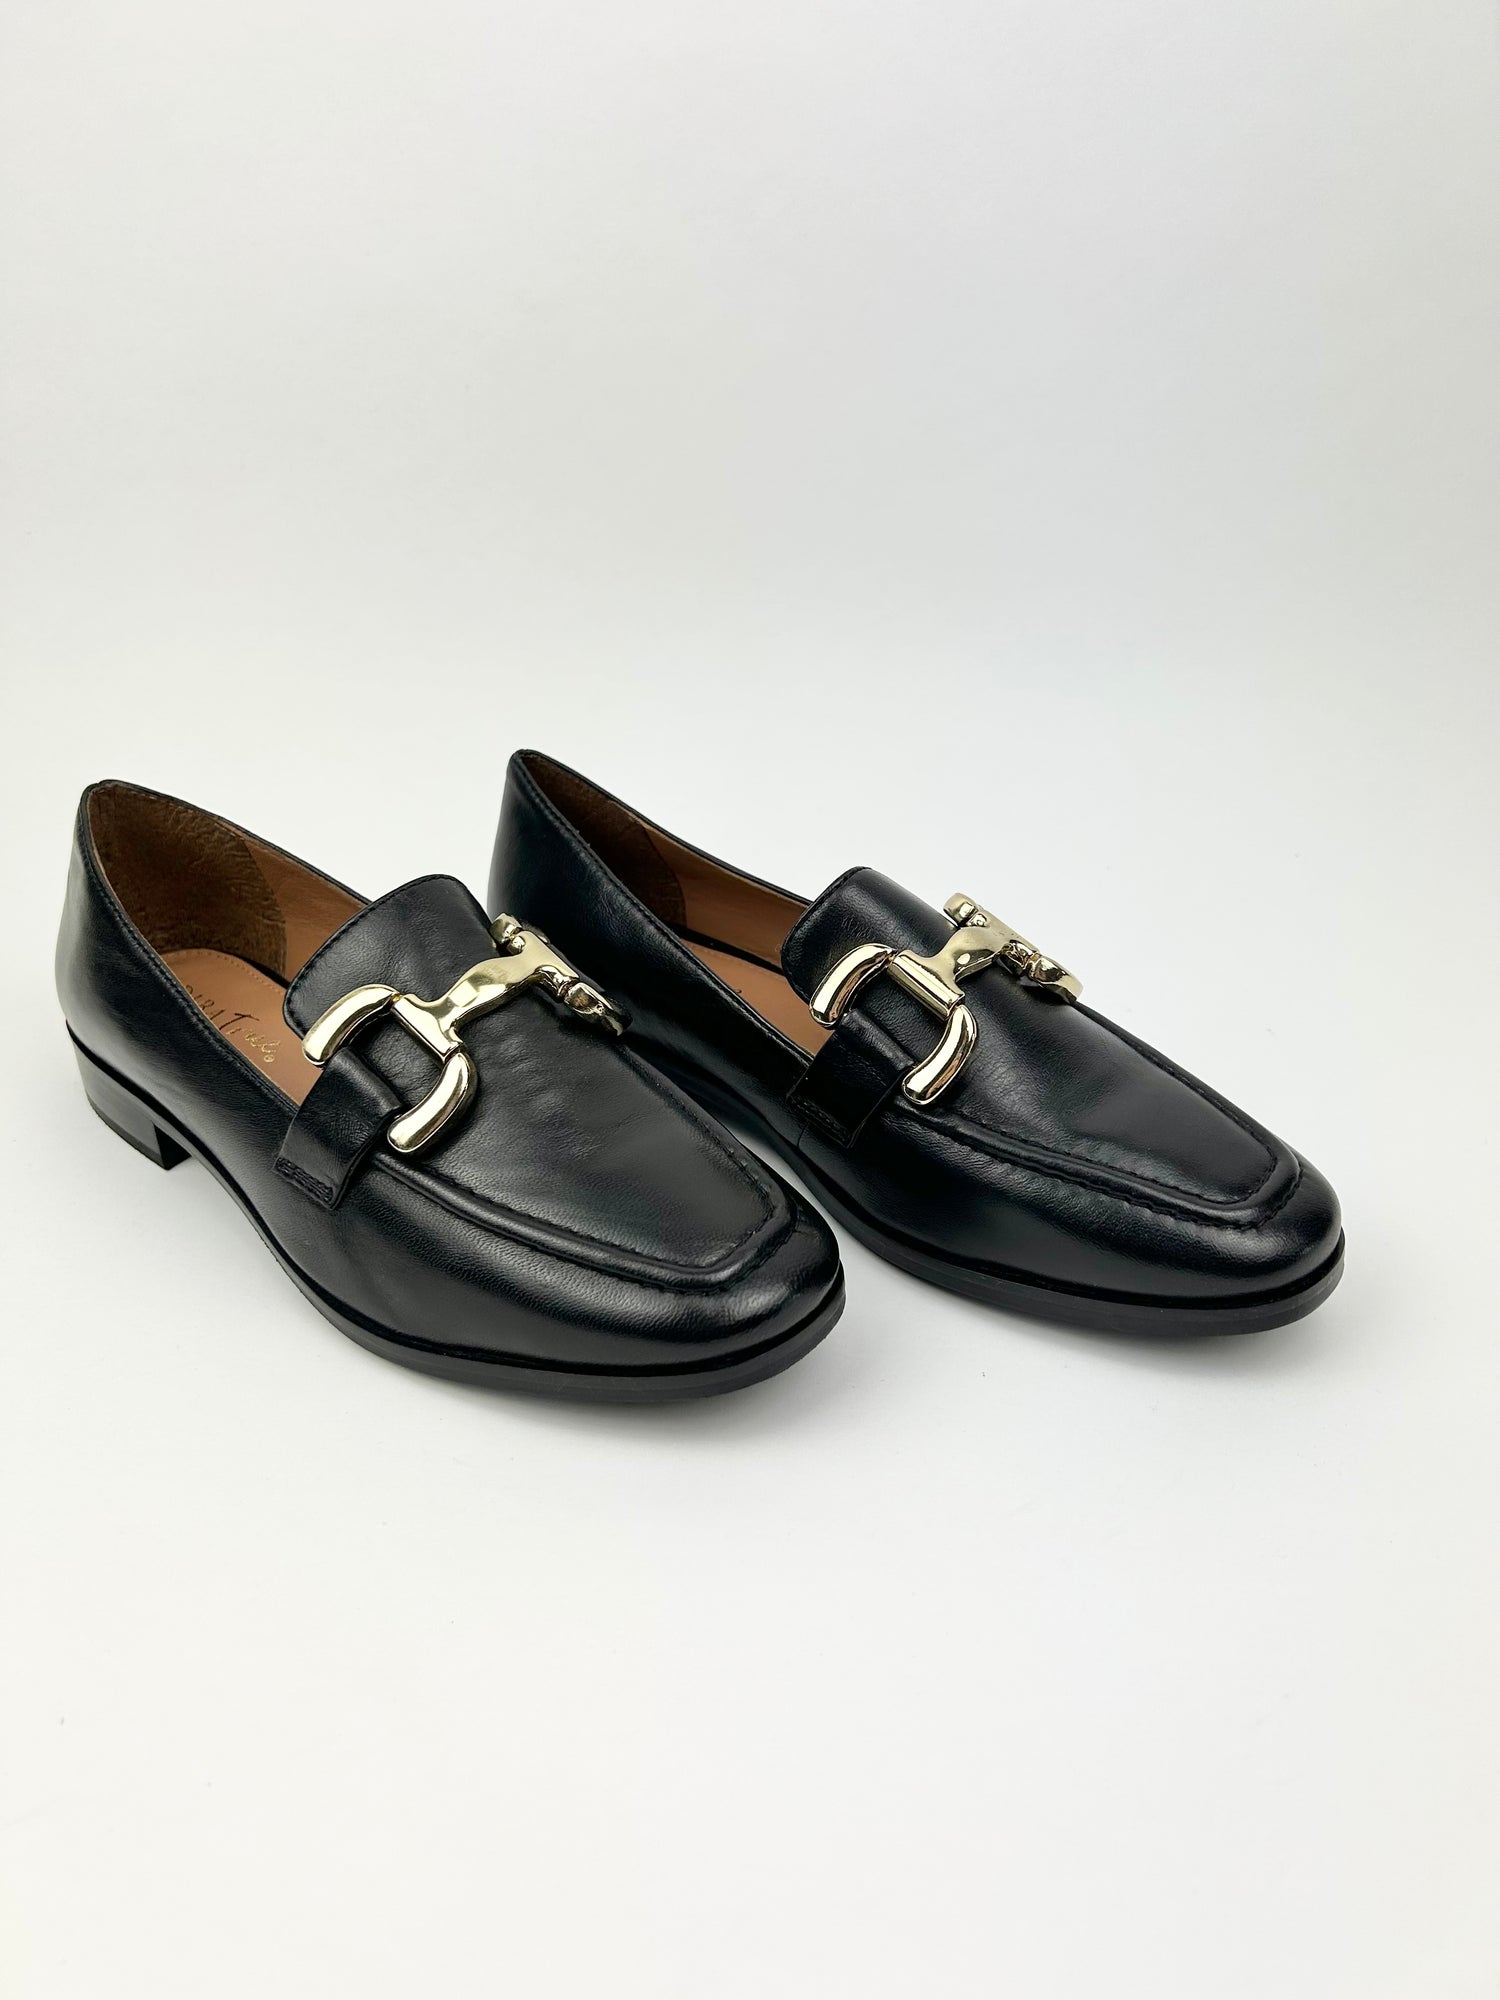 Loafer About It - Black Shoes in 6 at Wrapsody